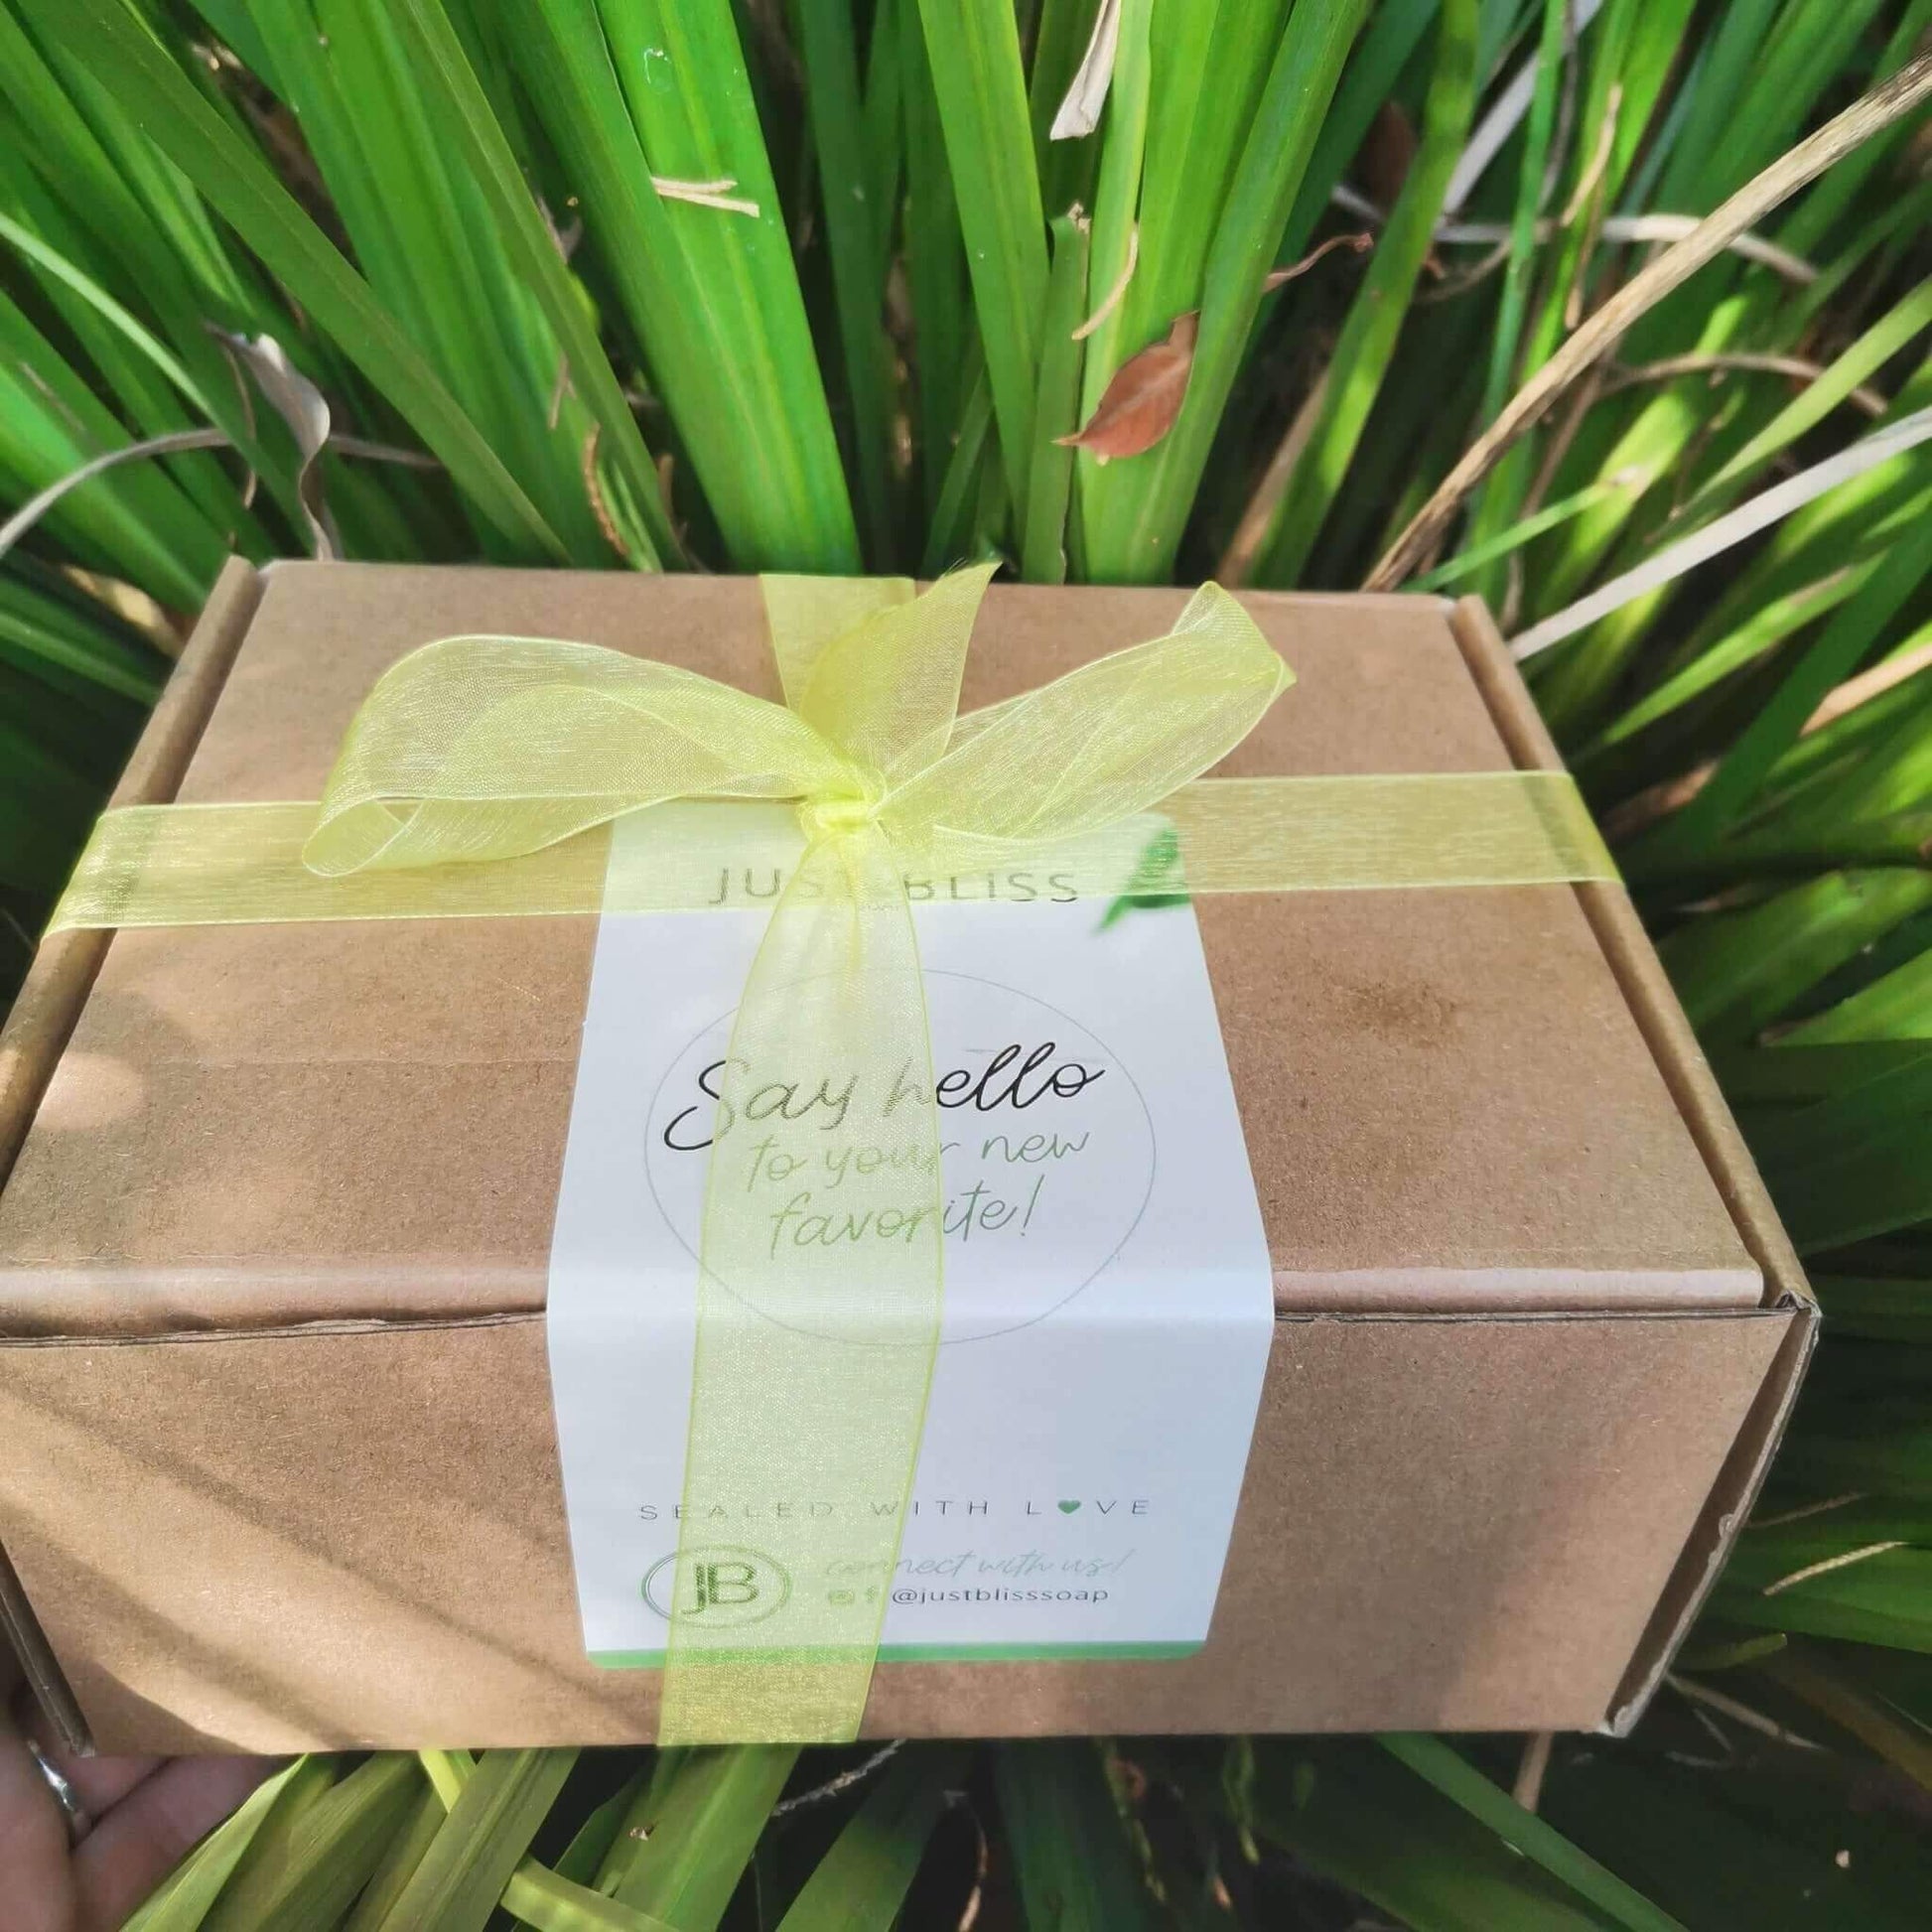 JUSTBLISS: GIFT BOX: rosemary and mint (box2)